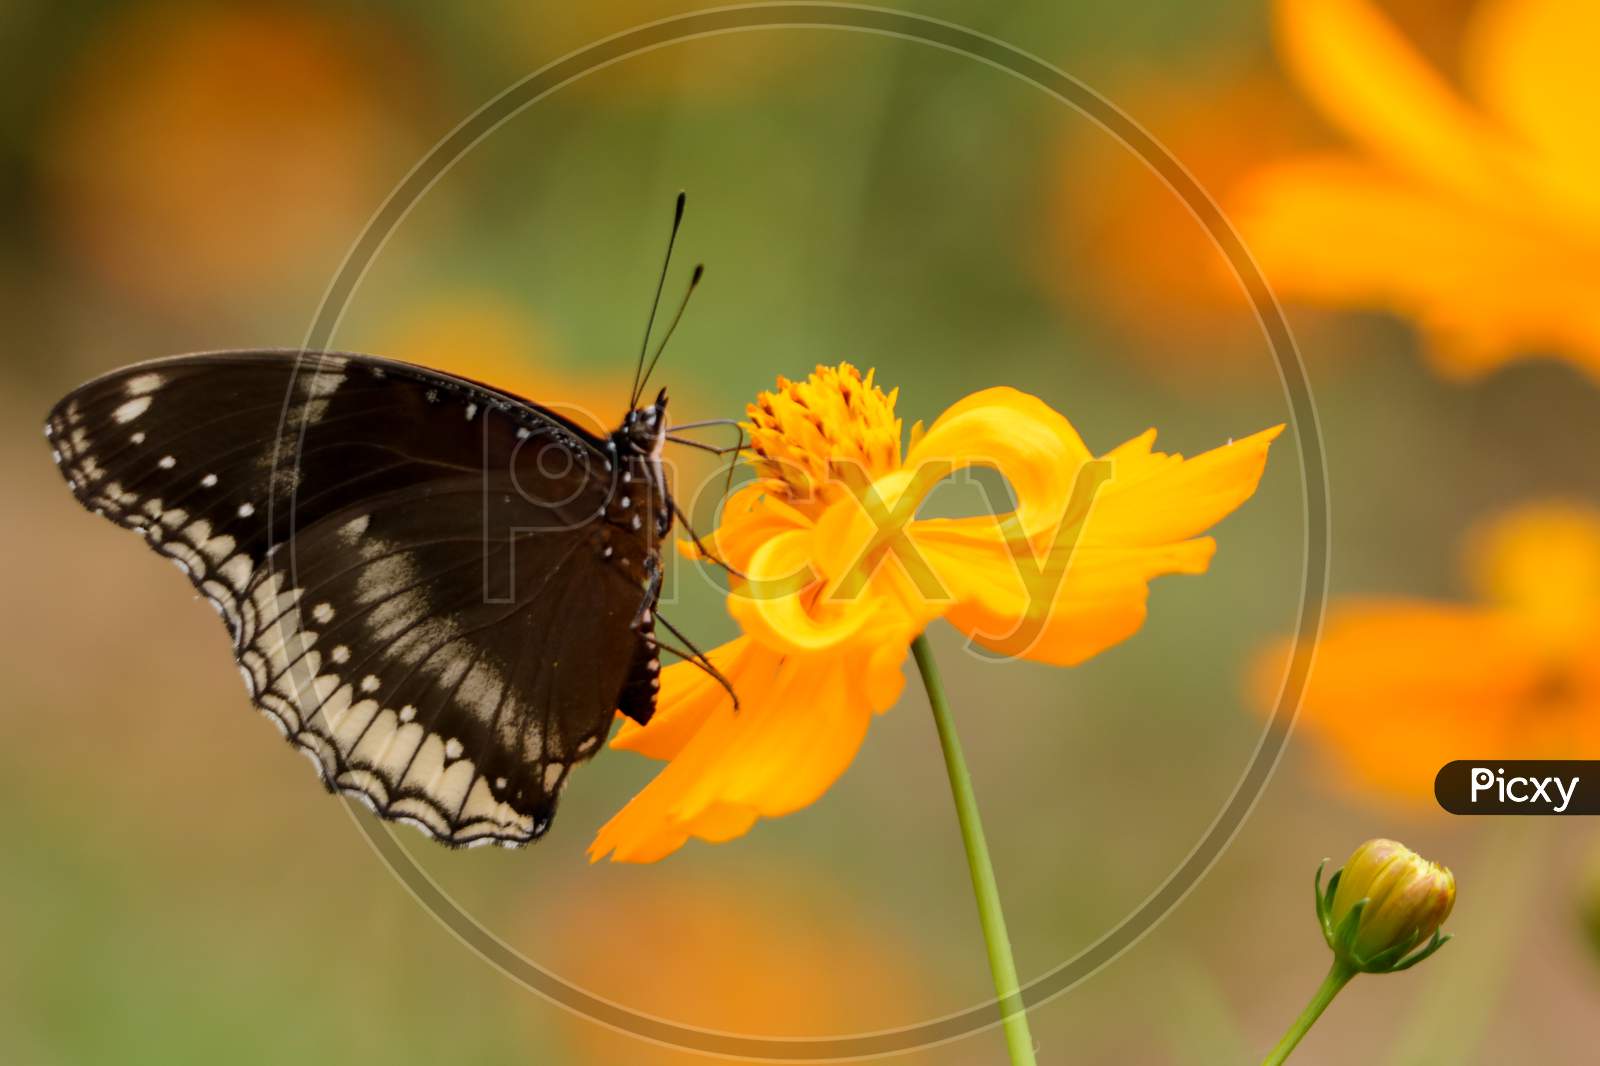 butterfly on flower ,nature photography